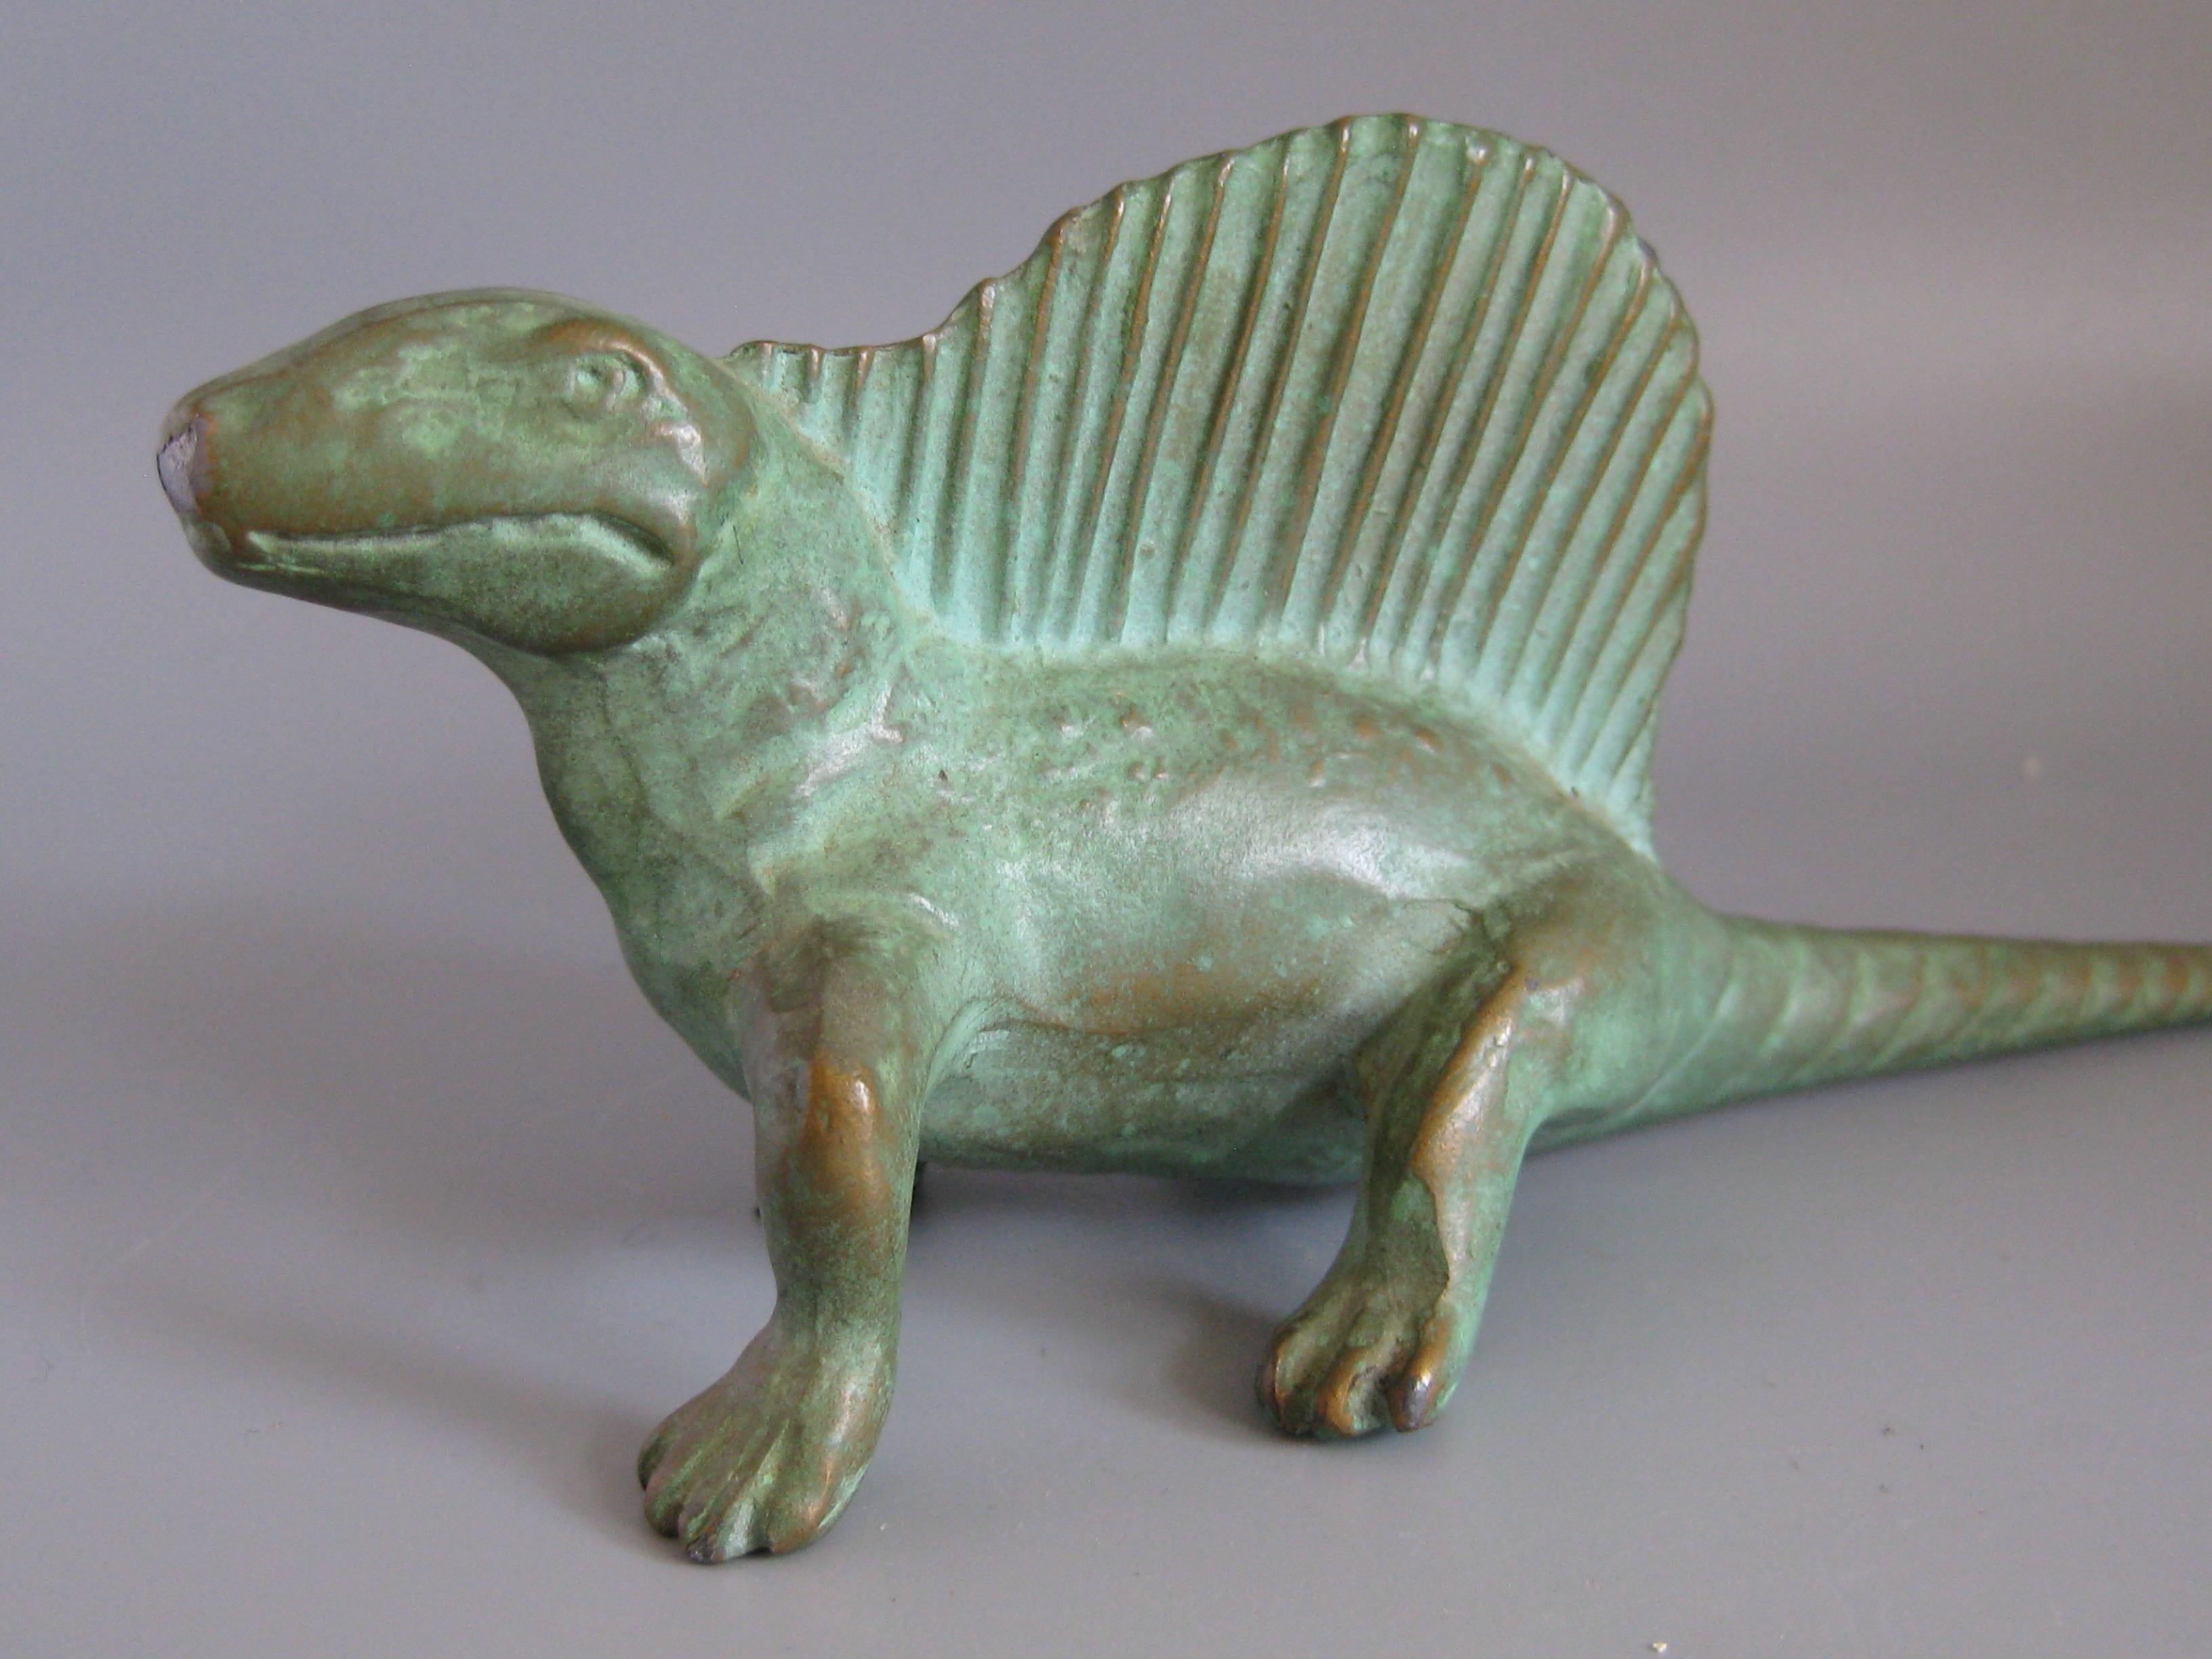 Great cast bronze Dimetrodon Dinosaur statue/sculpture dating from 1947. Marked on the bottom by the maker. Great details and wonderful patina. In excellent condition. Measures: Approximate 7